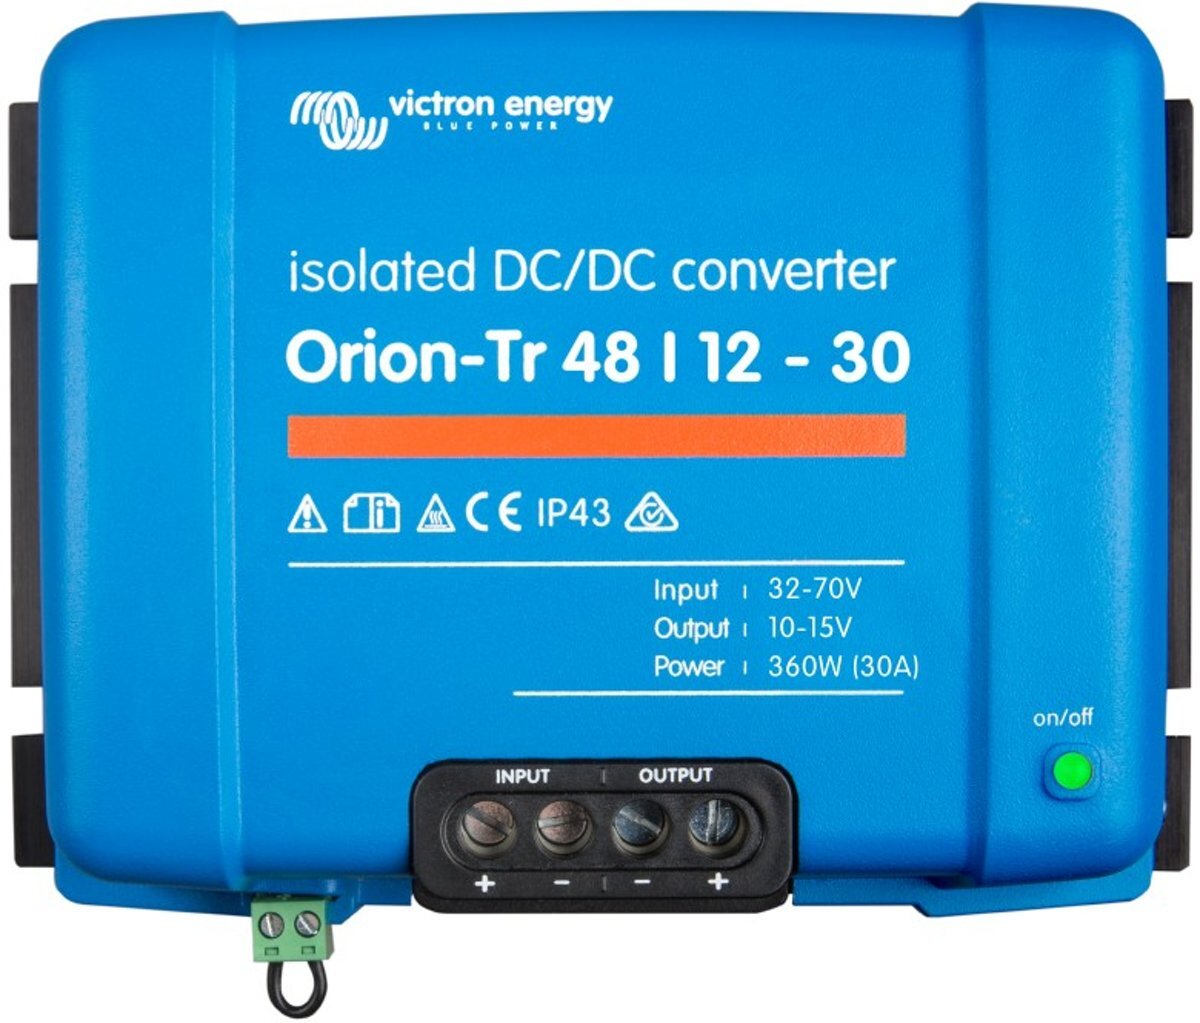 Victron Orion-Tr 48/12-30A 360W isolated